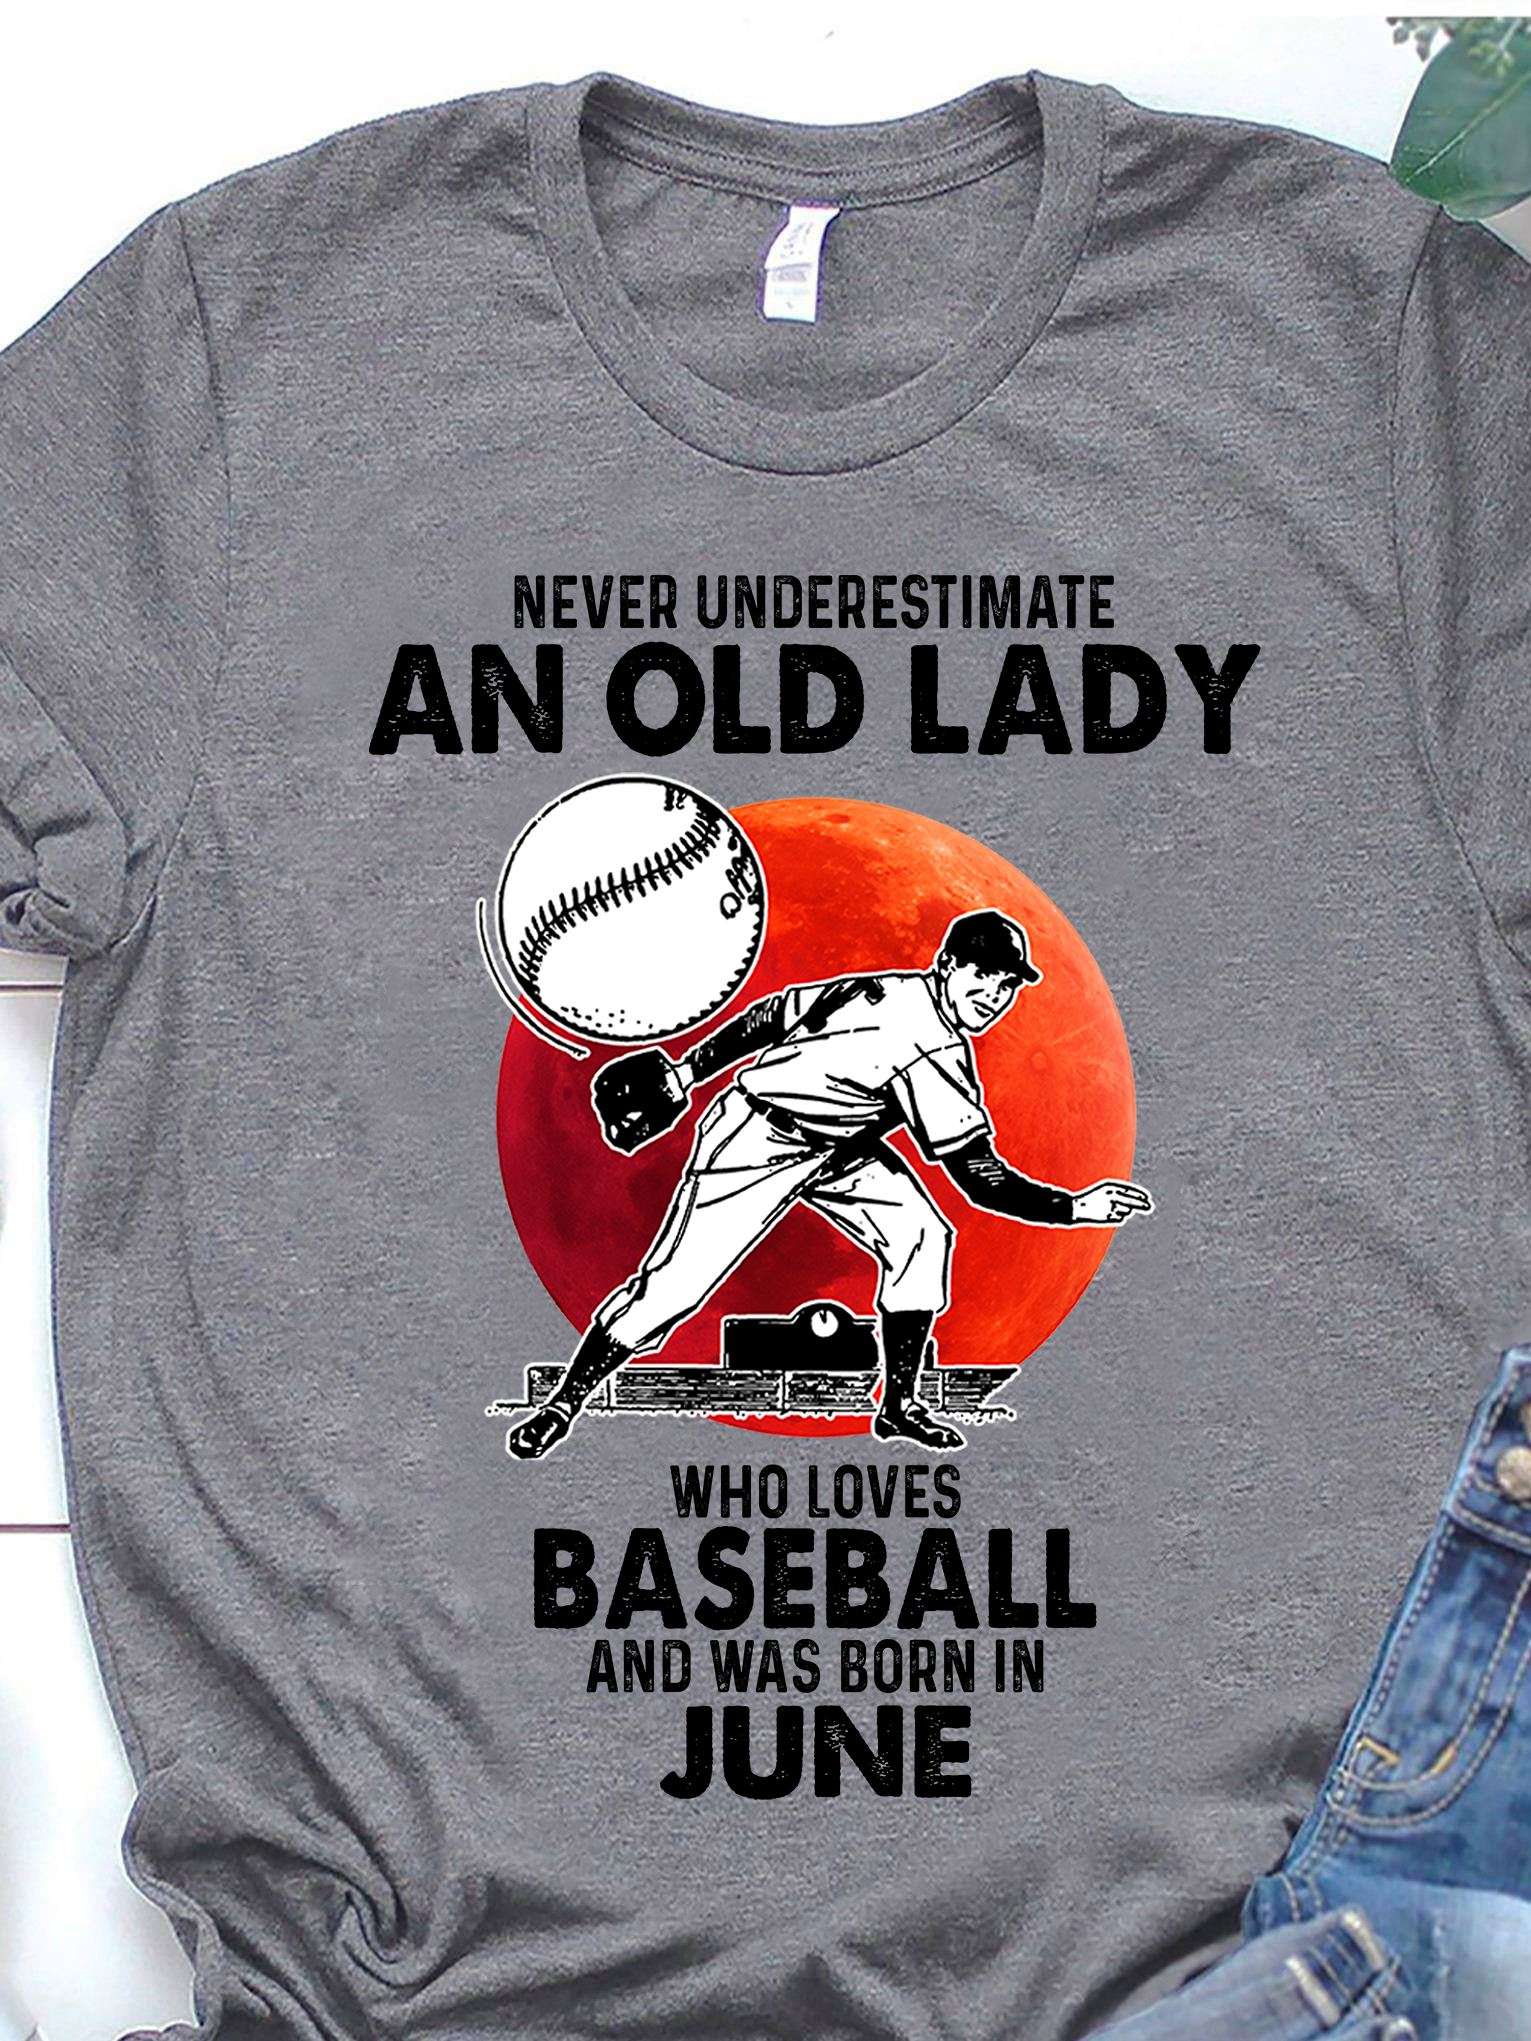 Never underestimate an old lady who loves baseball and was born in June